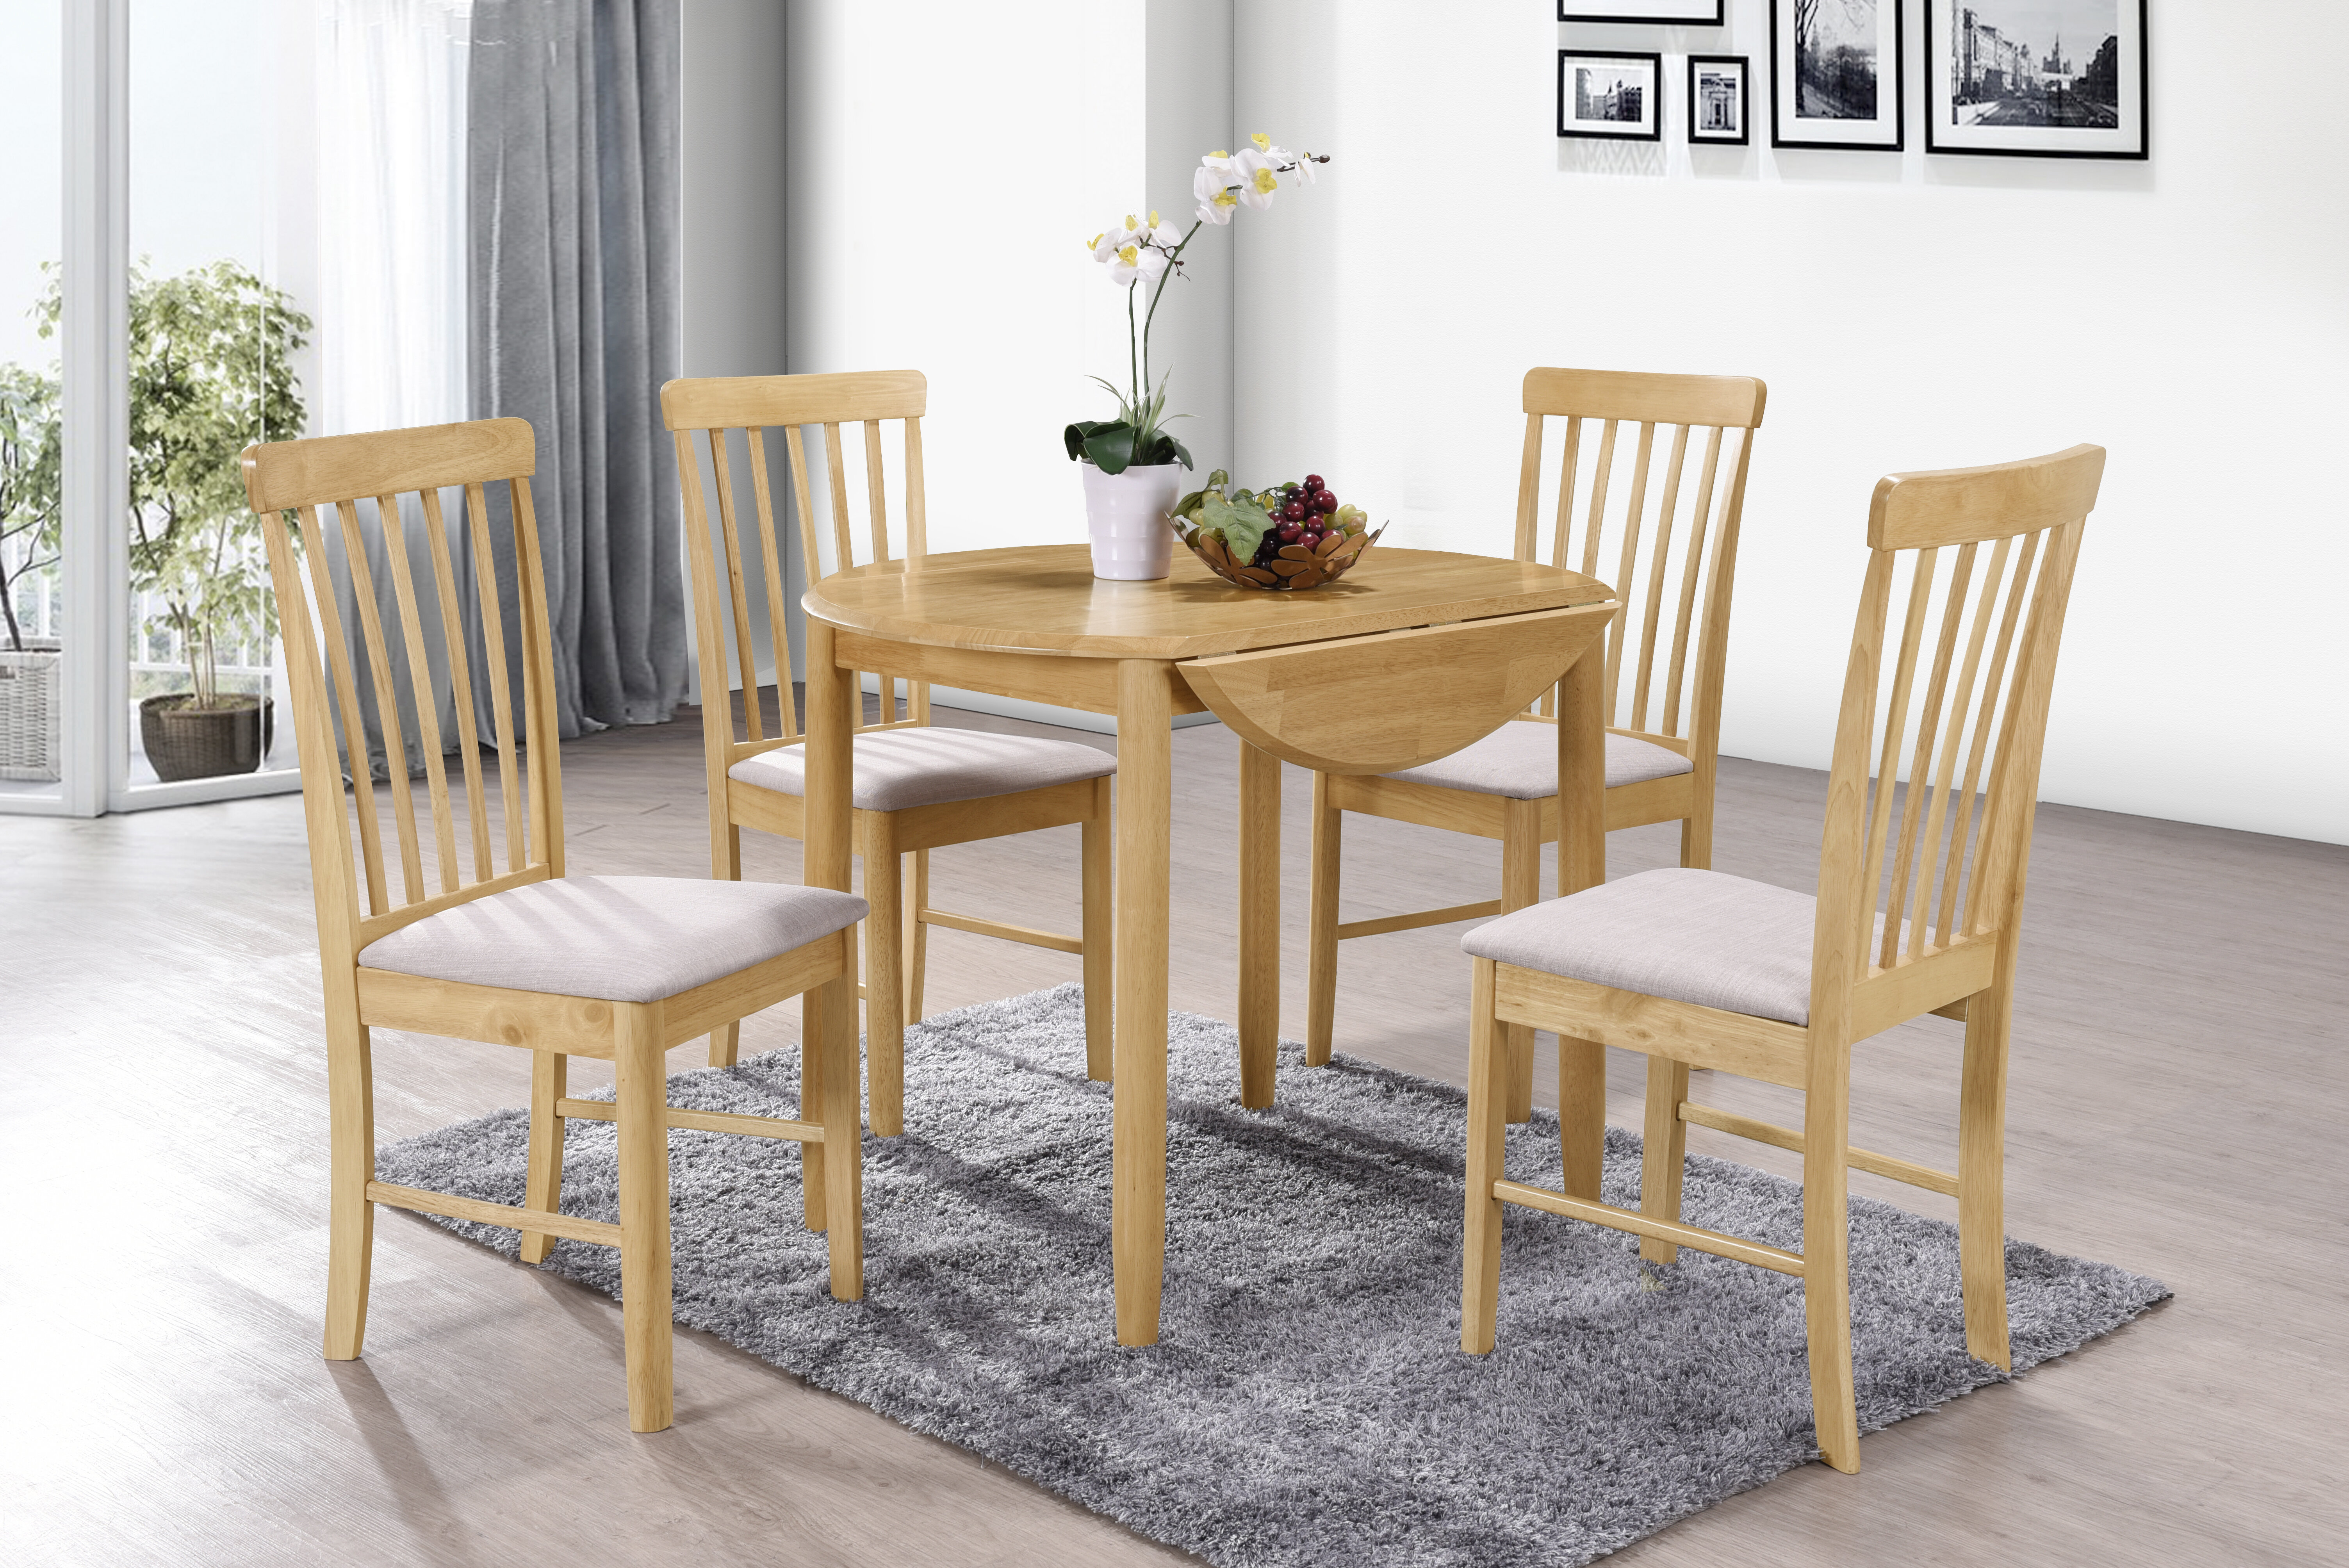 ankrum folding dining set with 4 chairs